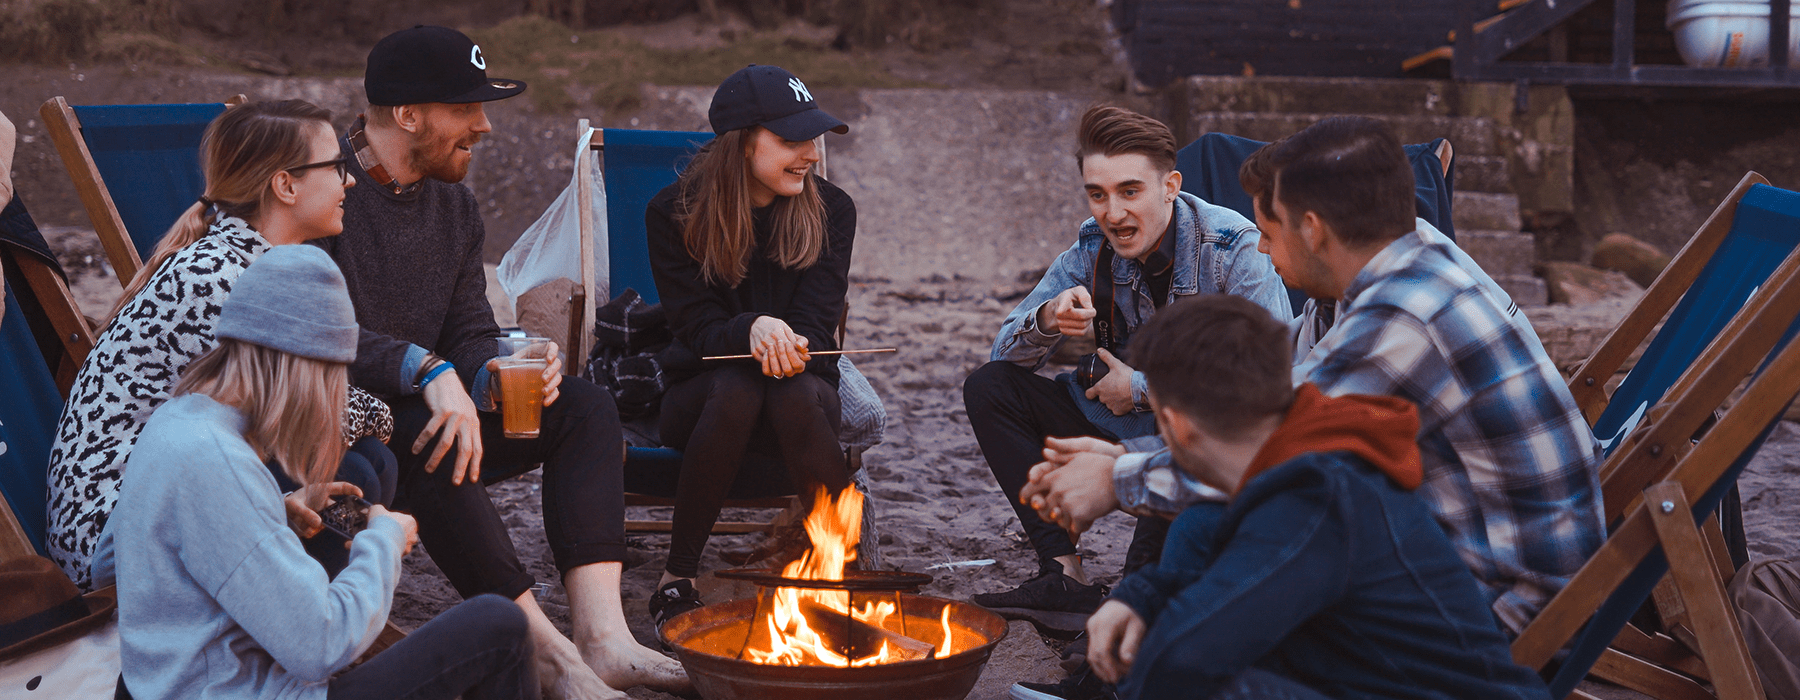 lifestyle image of a group of people relaxing outdoors around a campfire